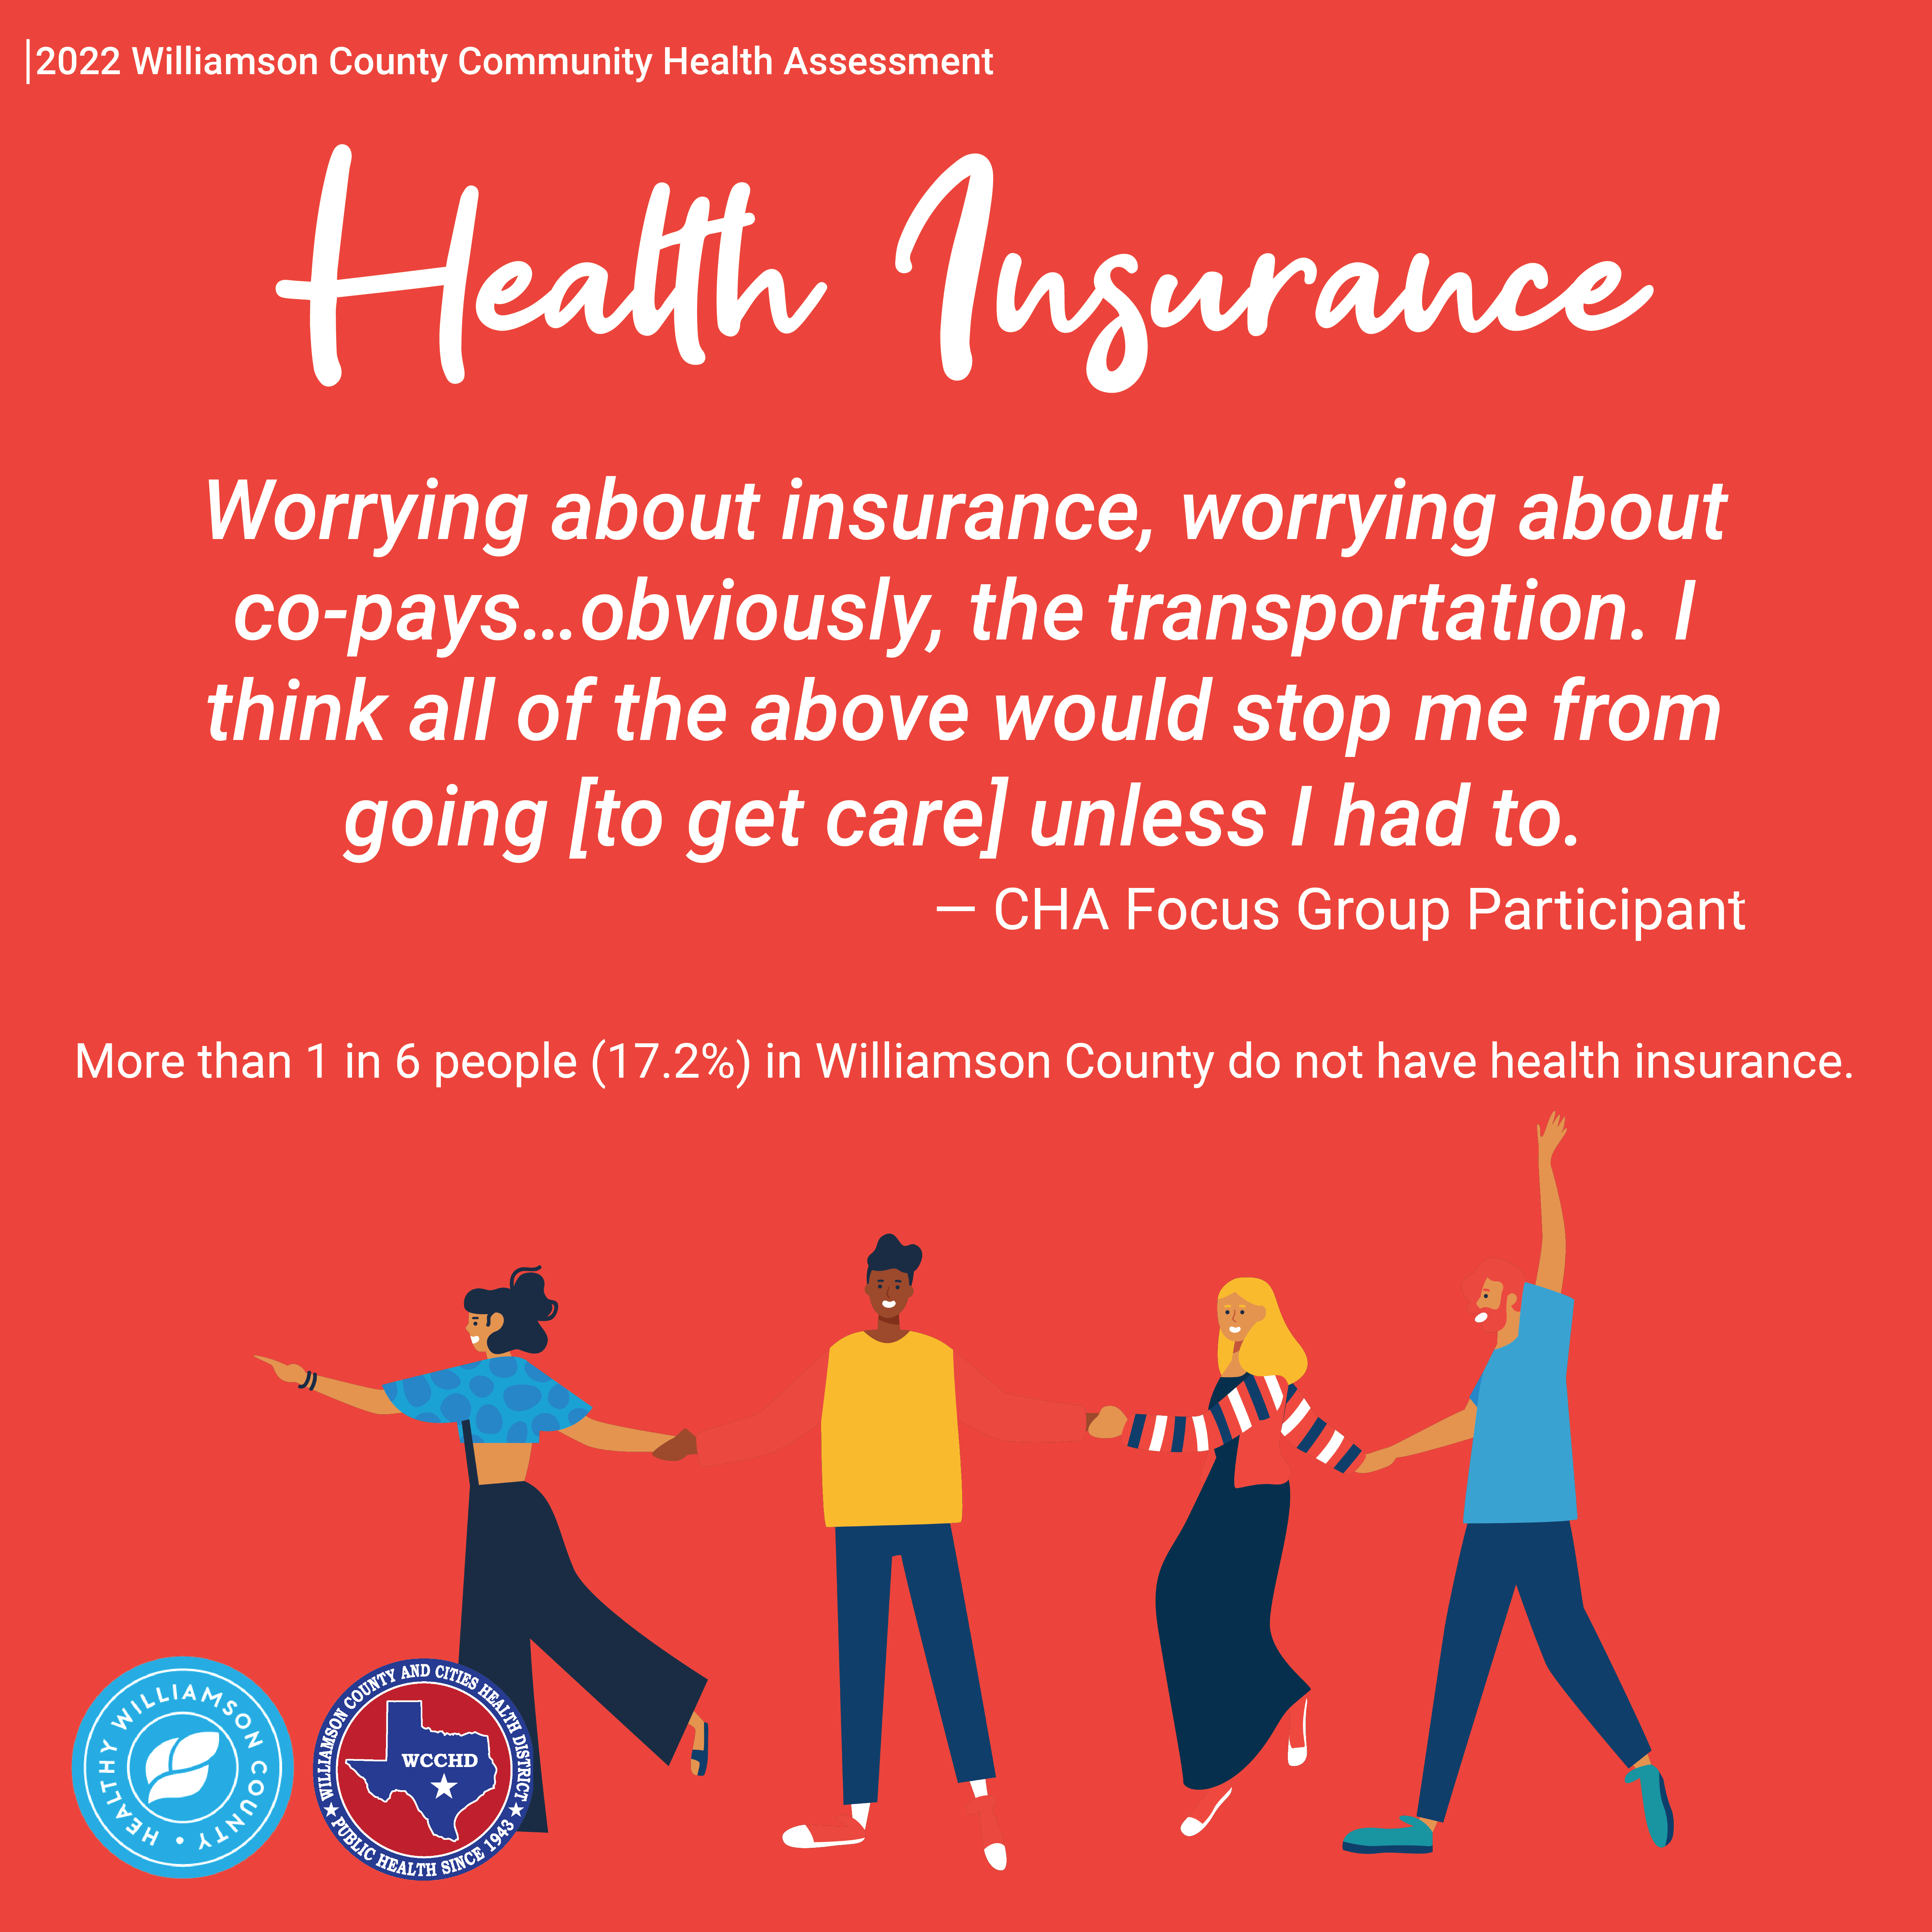 2022 Williamson County Community Health Assessment. Health Insurance. Quotation from CHA focus group participant: "Worrying about insurance, worrying about co-pays...obviously, the transportation. I think all of the above would stop me from going [to get care] unless I had to." Below, text: More than 1 in 6 people in Williamson County do not have health insurance. At the bottom, four illustrated people holding hands and smiling. Logos of Healthy Williamson County and Williamson County and Cities Health District.